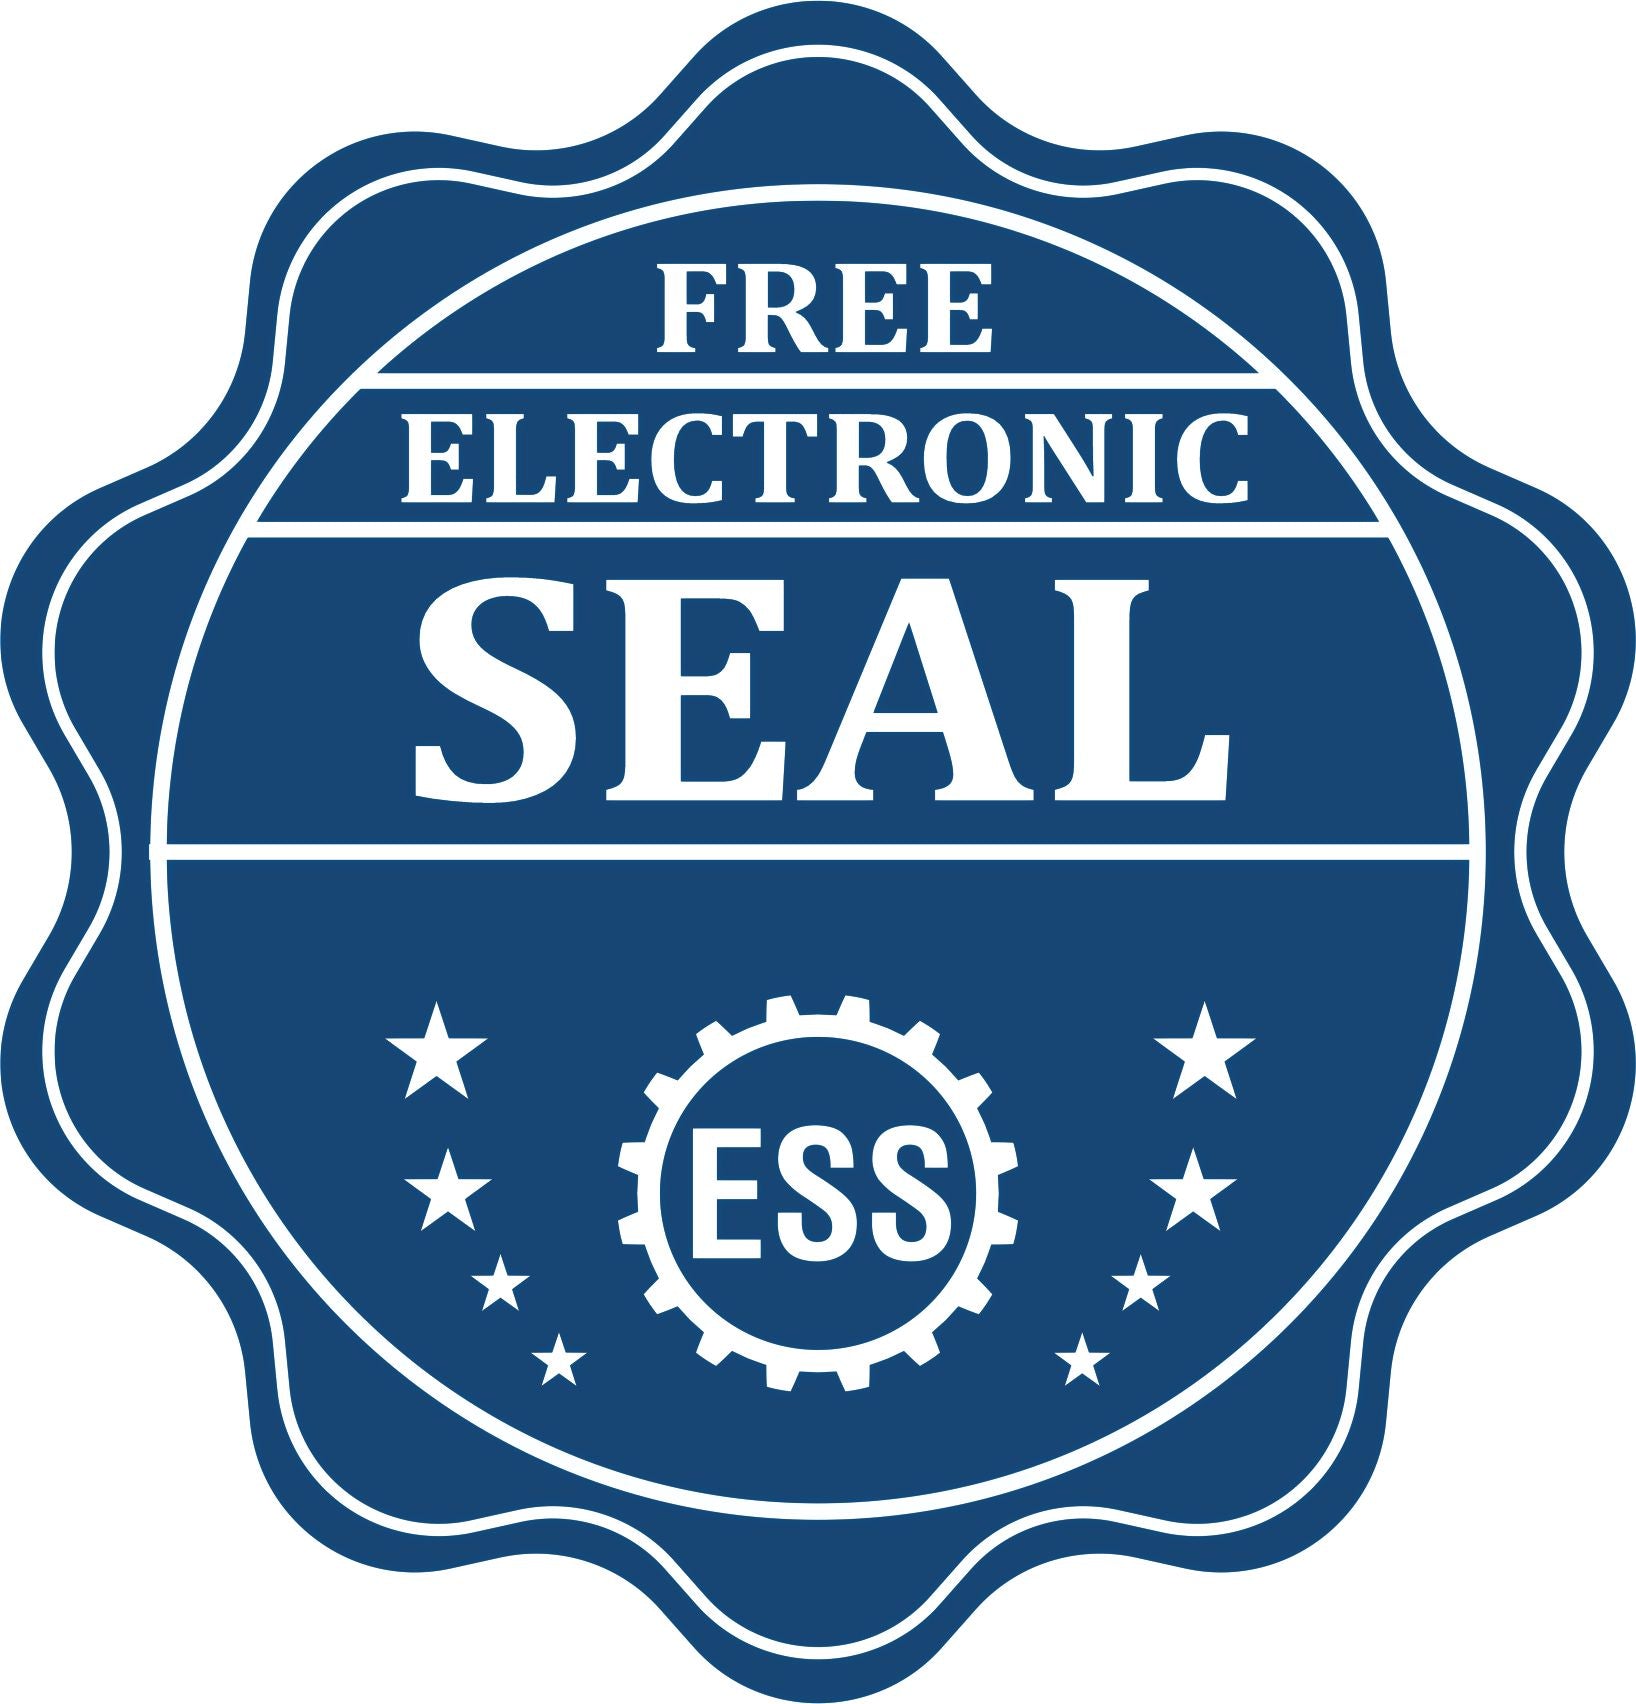 A badge showing a free electronic seal for the Slim Pre-Inked State Seal Notary Stamp for Louisiana with stars and the ESS gear on the emblem.